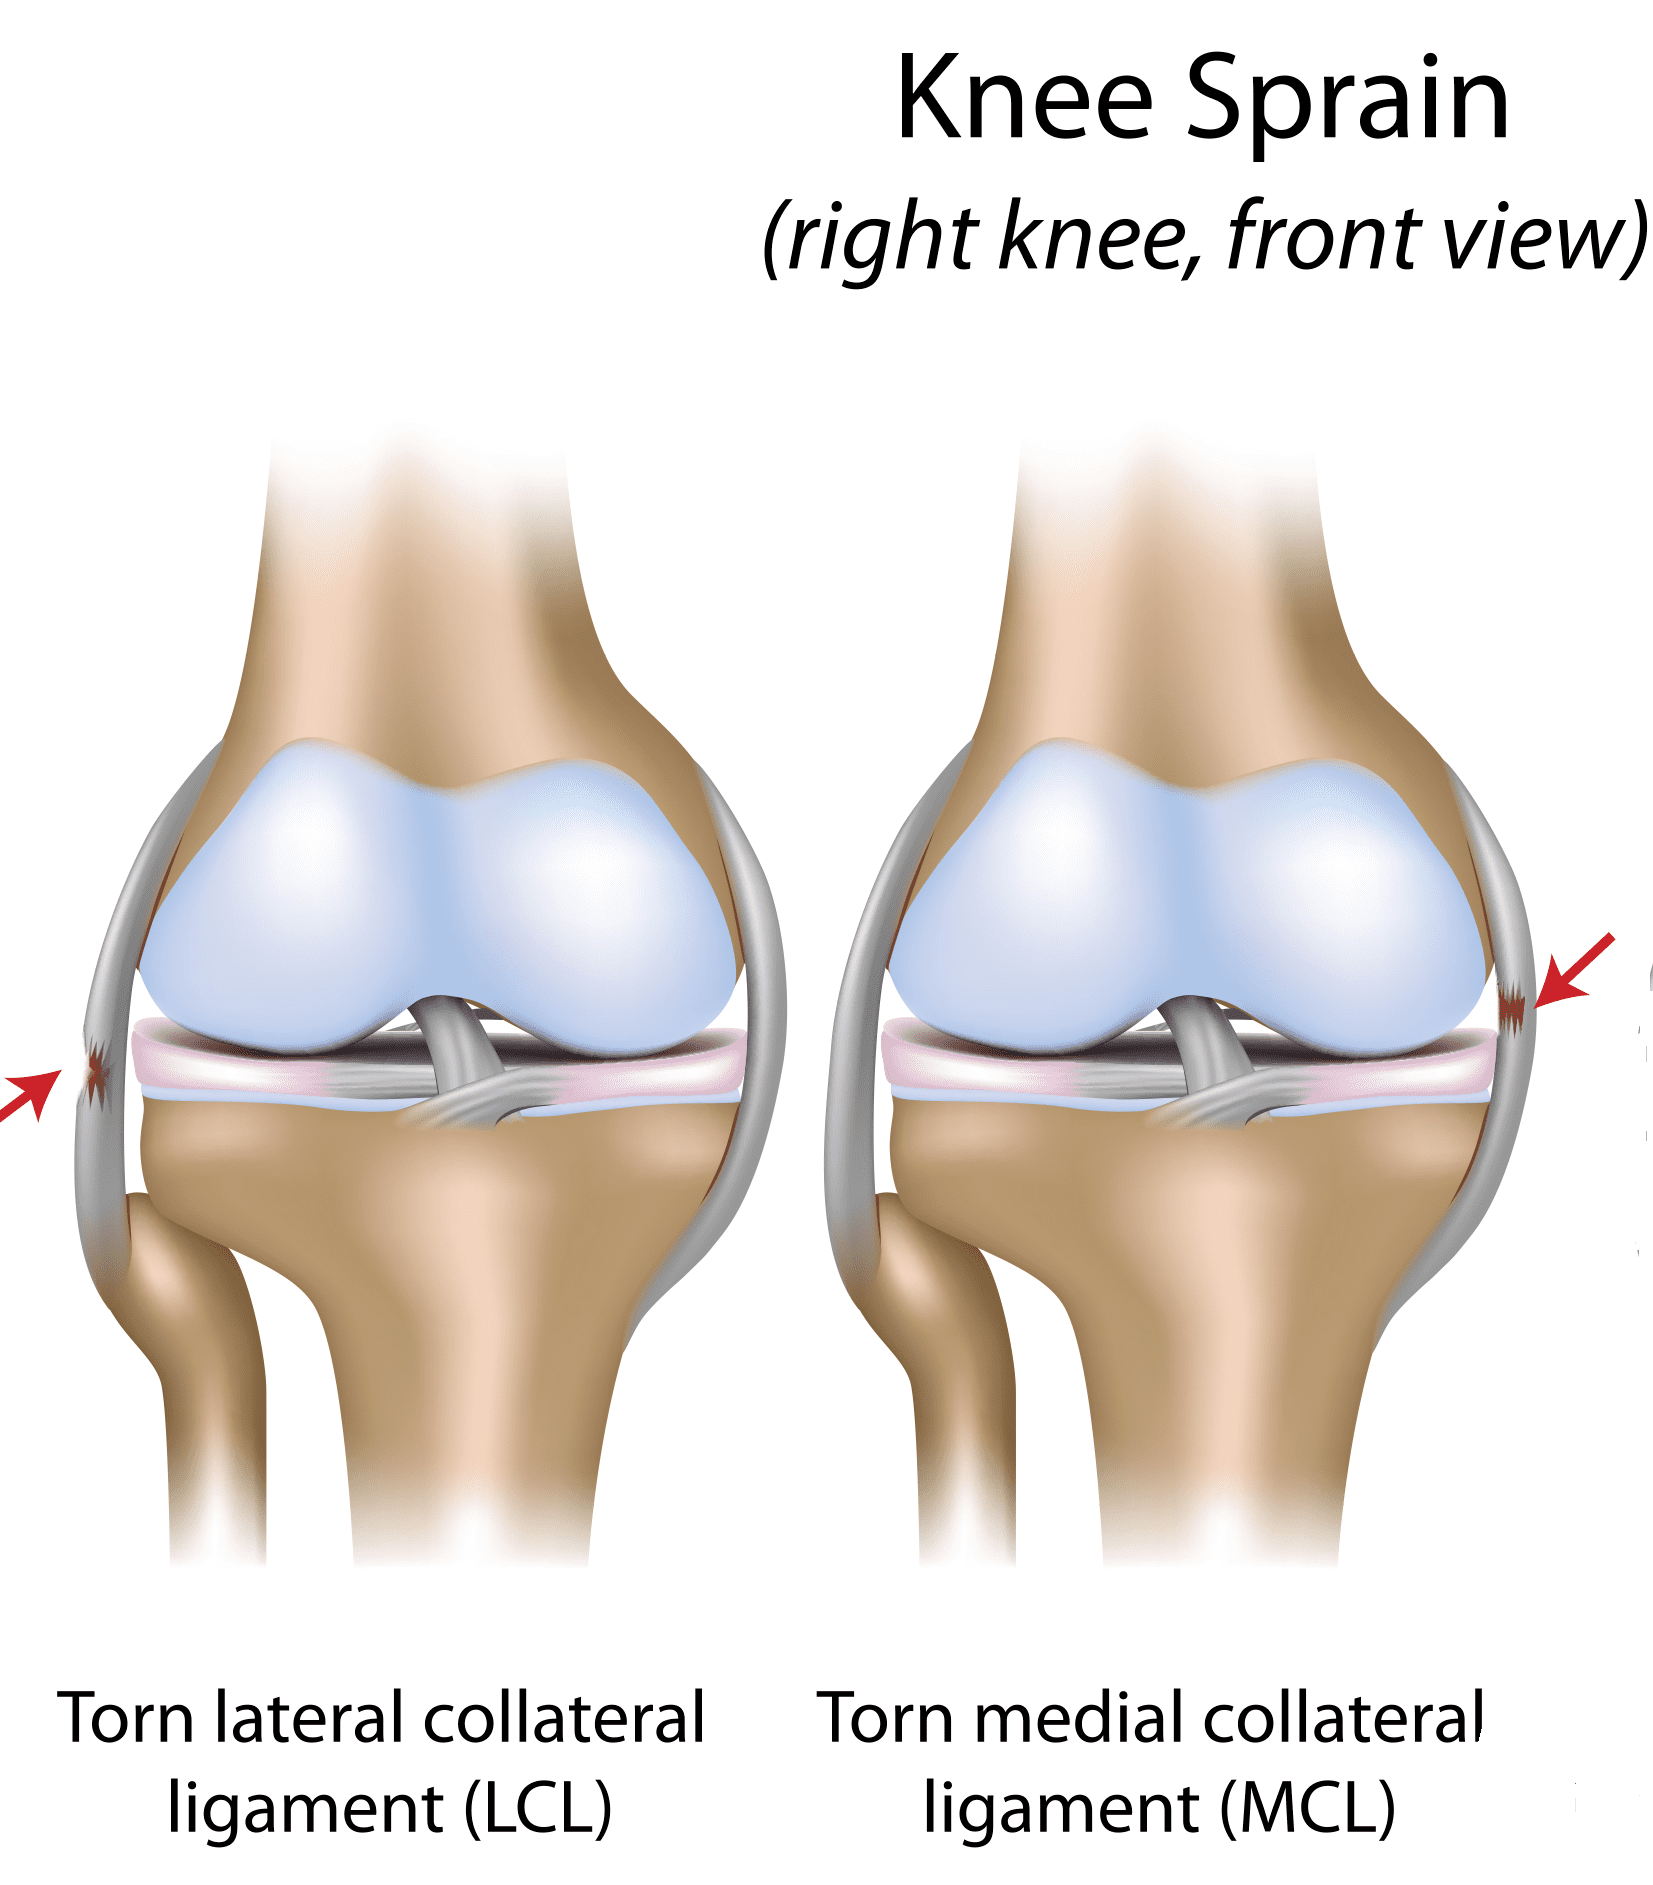 LCL (Lateral Collateral Ligament) Sprain